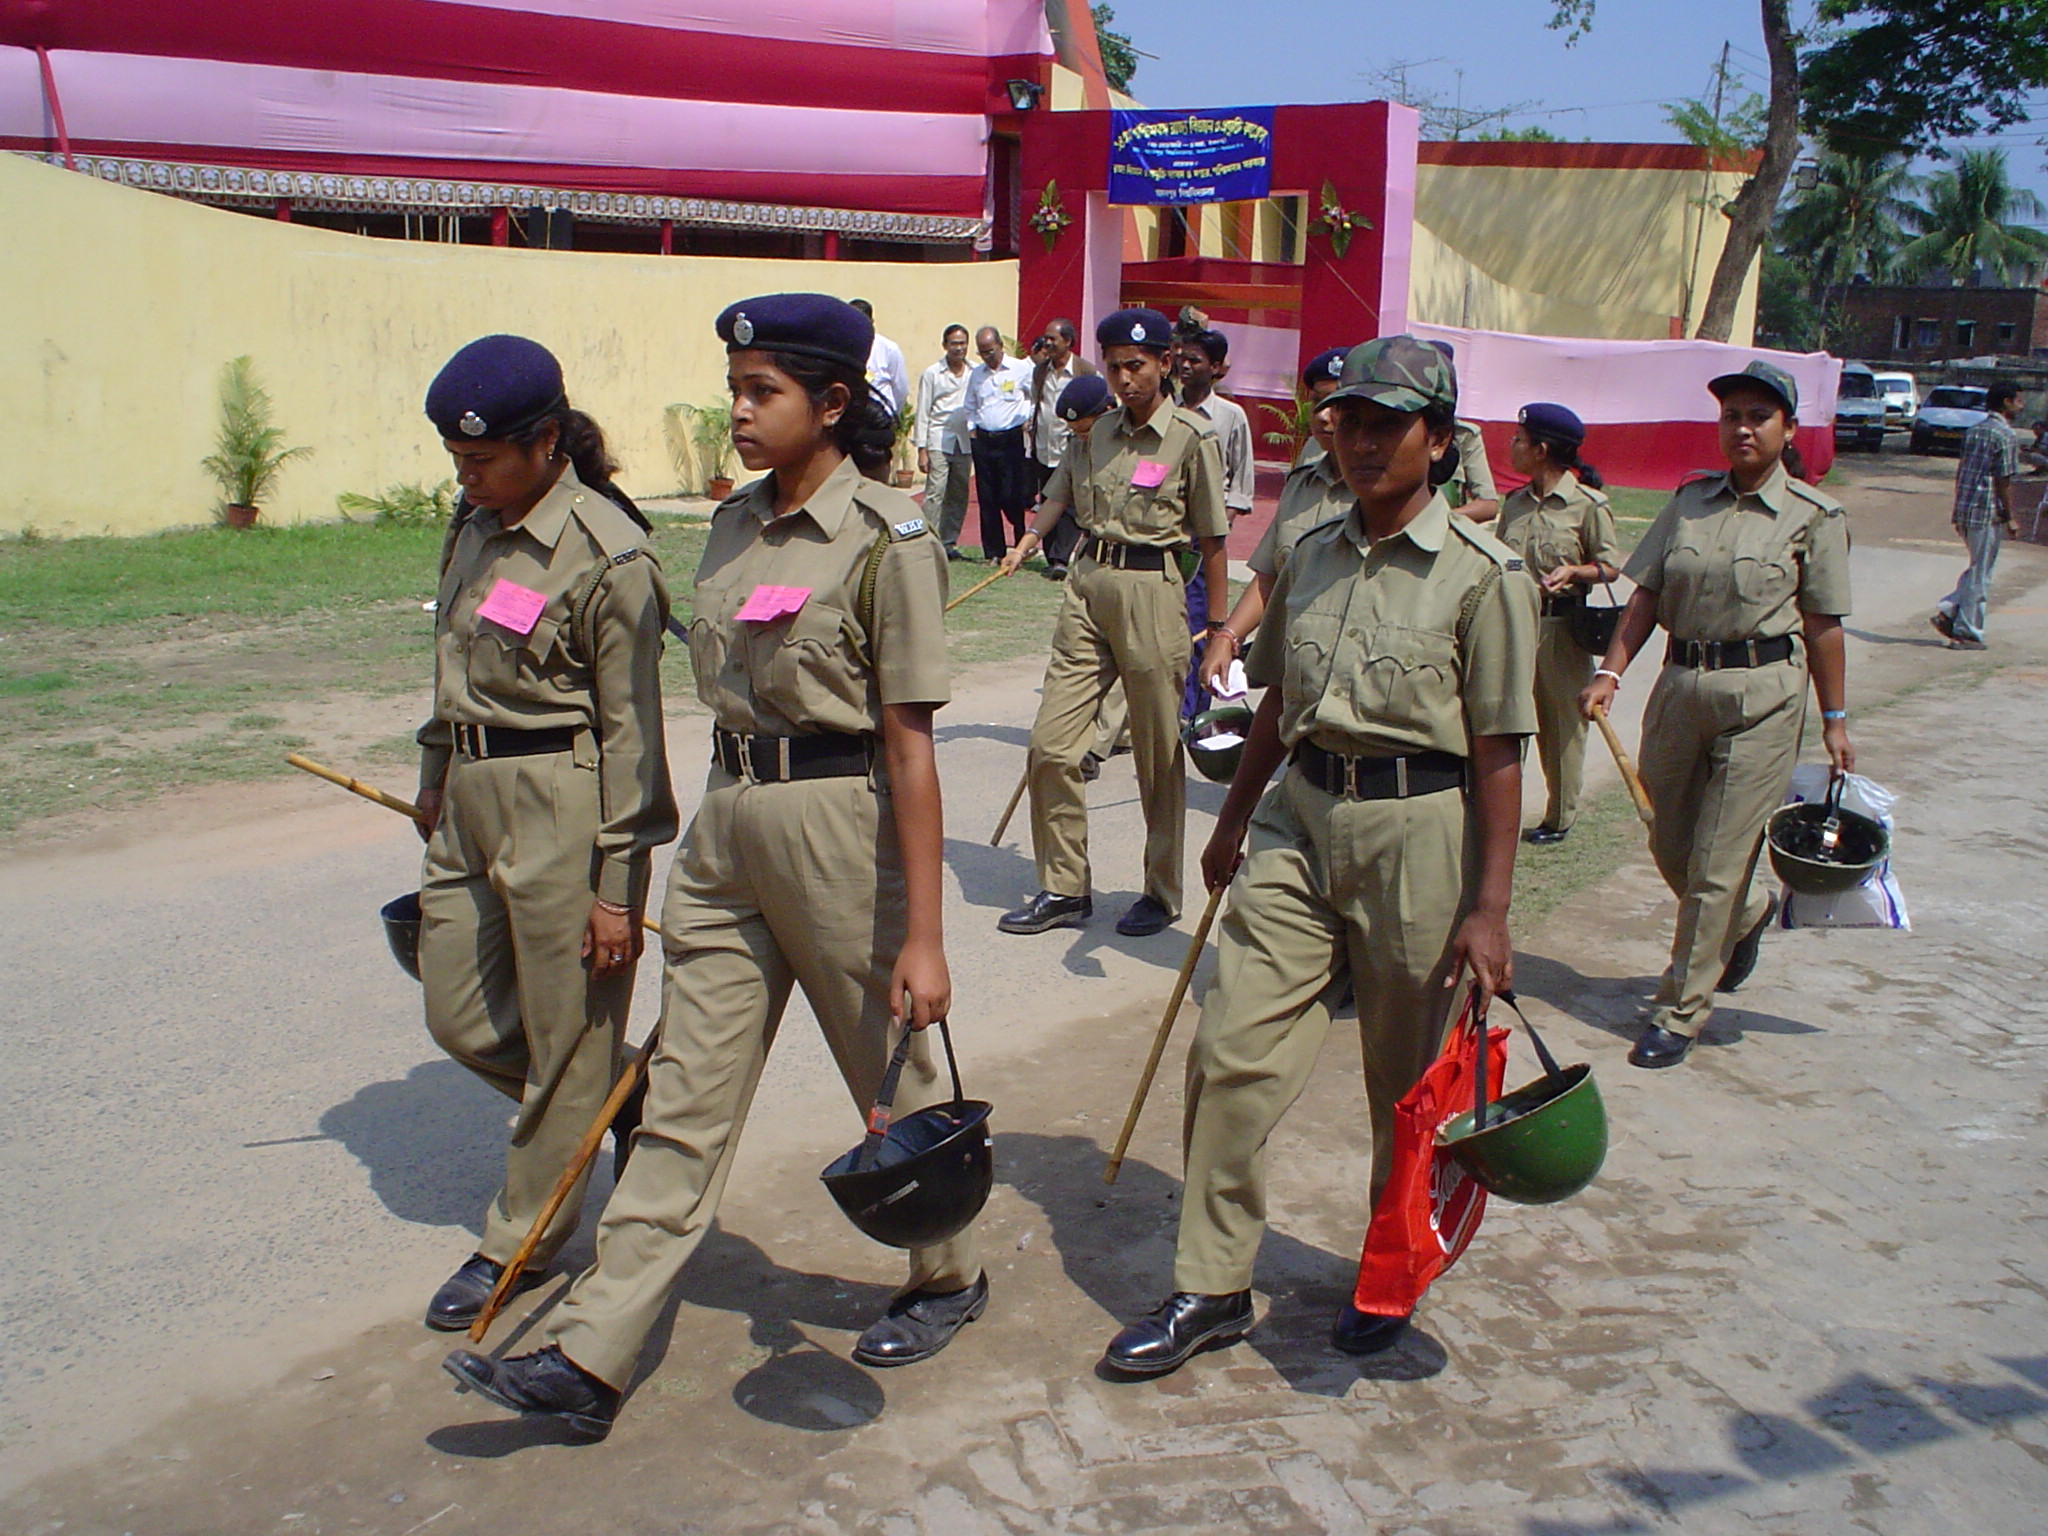 women-s-justice-in-india-enhanced-by-female-police-asia-and-amp-pacific